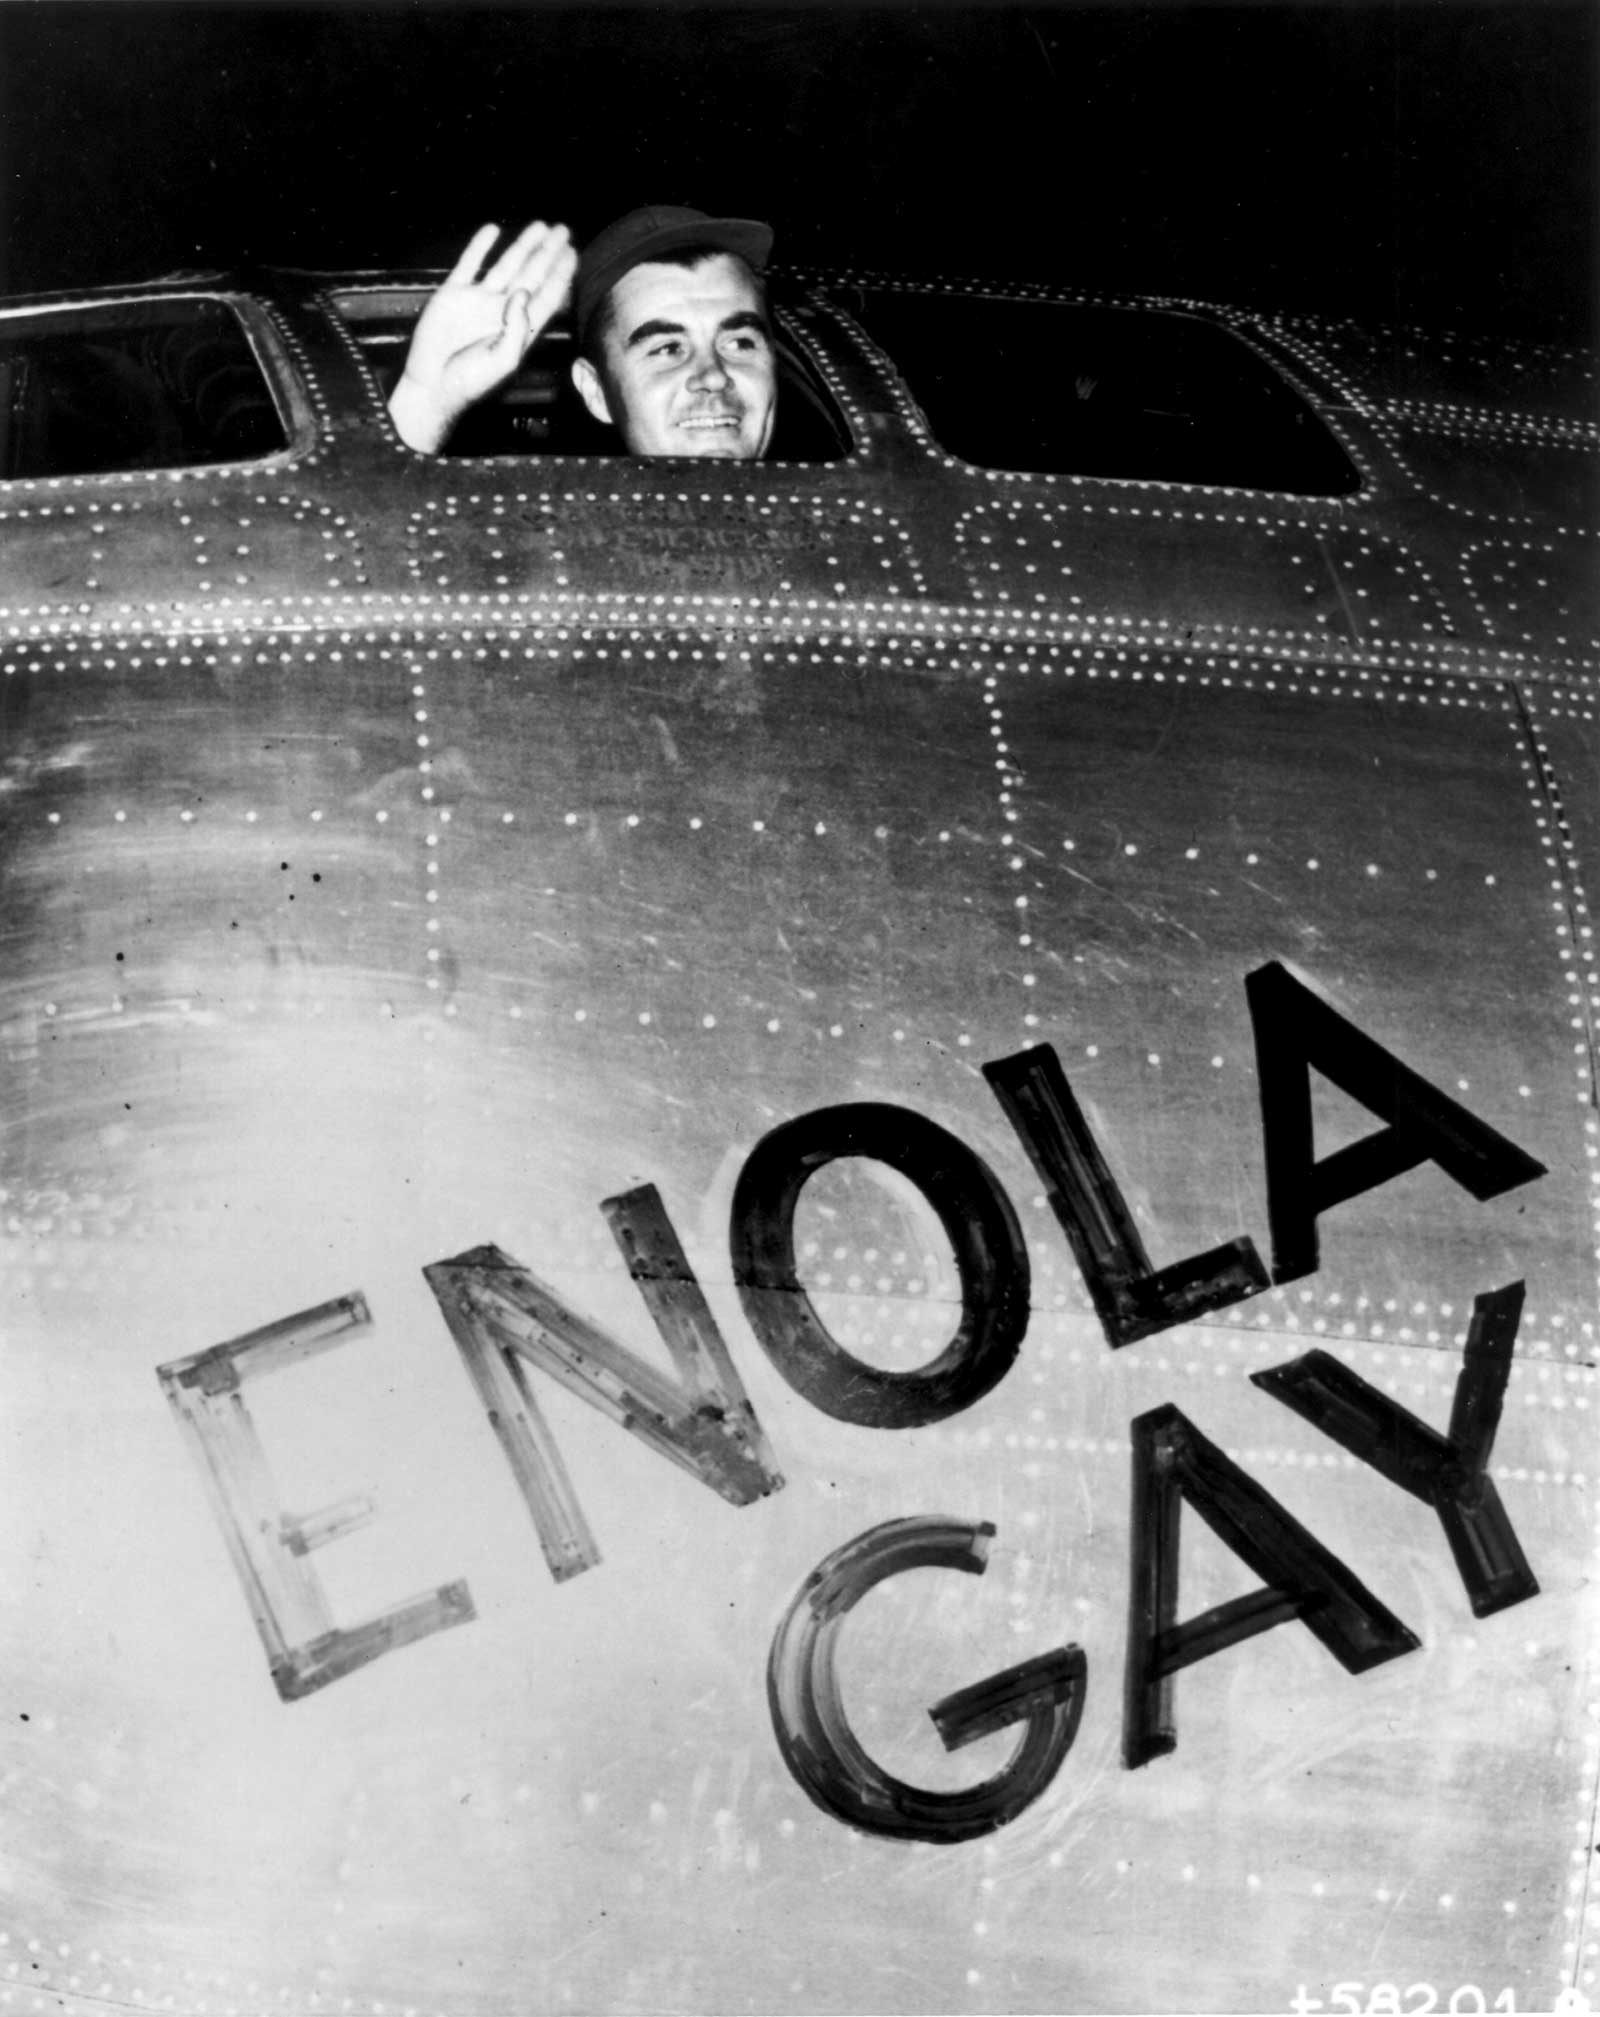 where is the enola gay airplane now